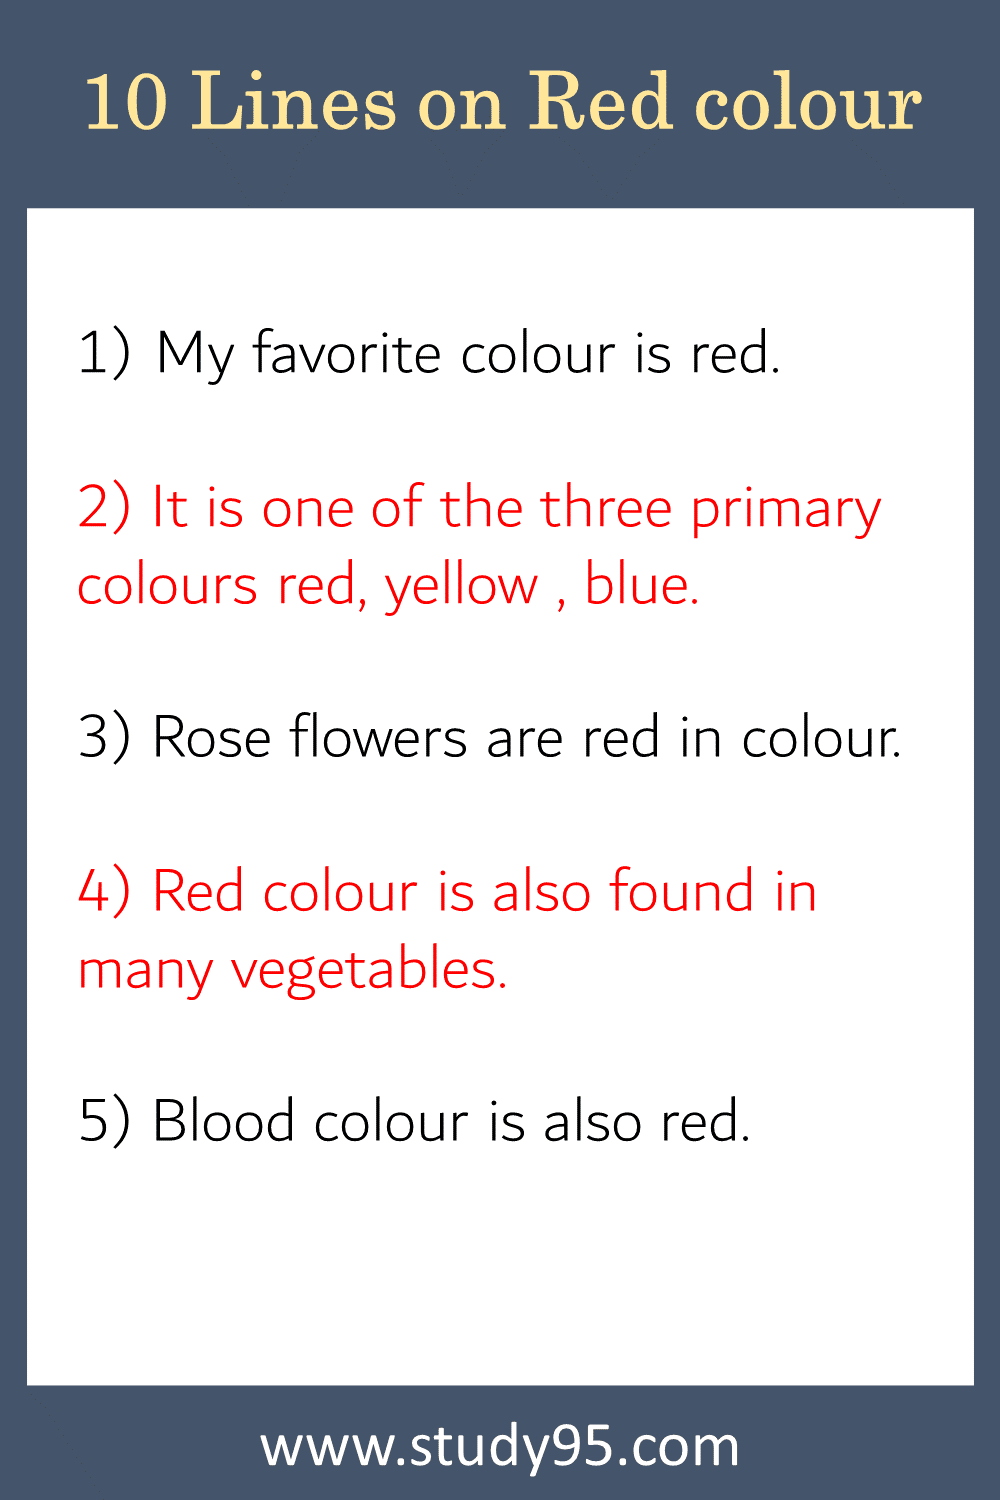 10 Lines on Red Colour